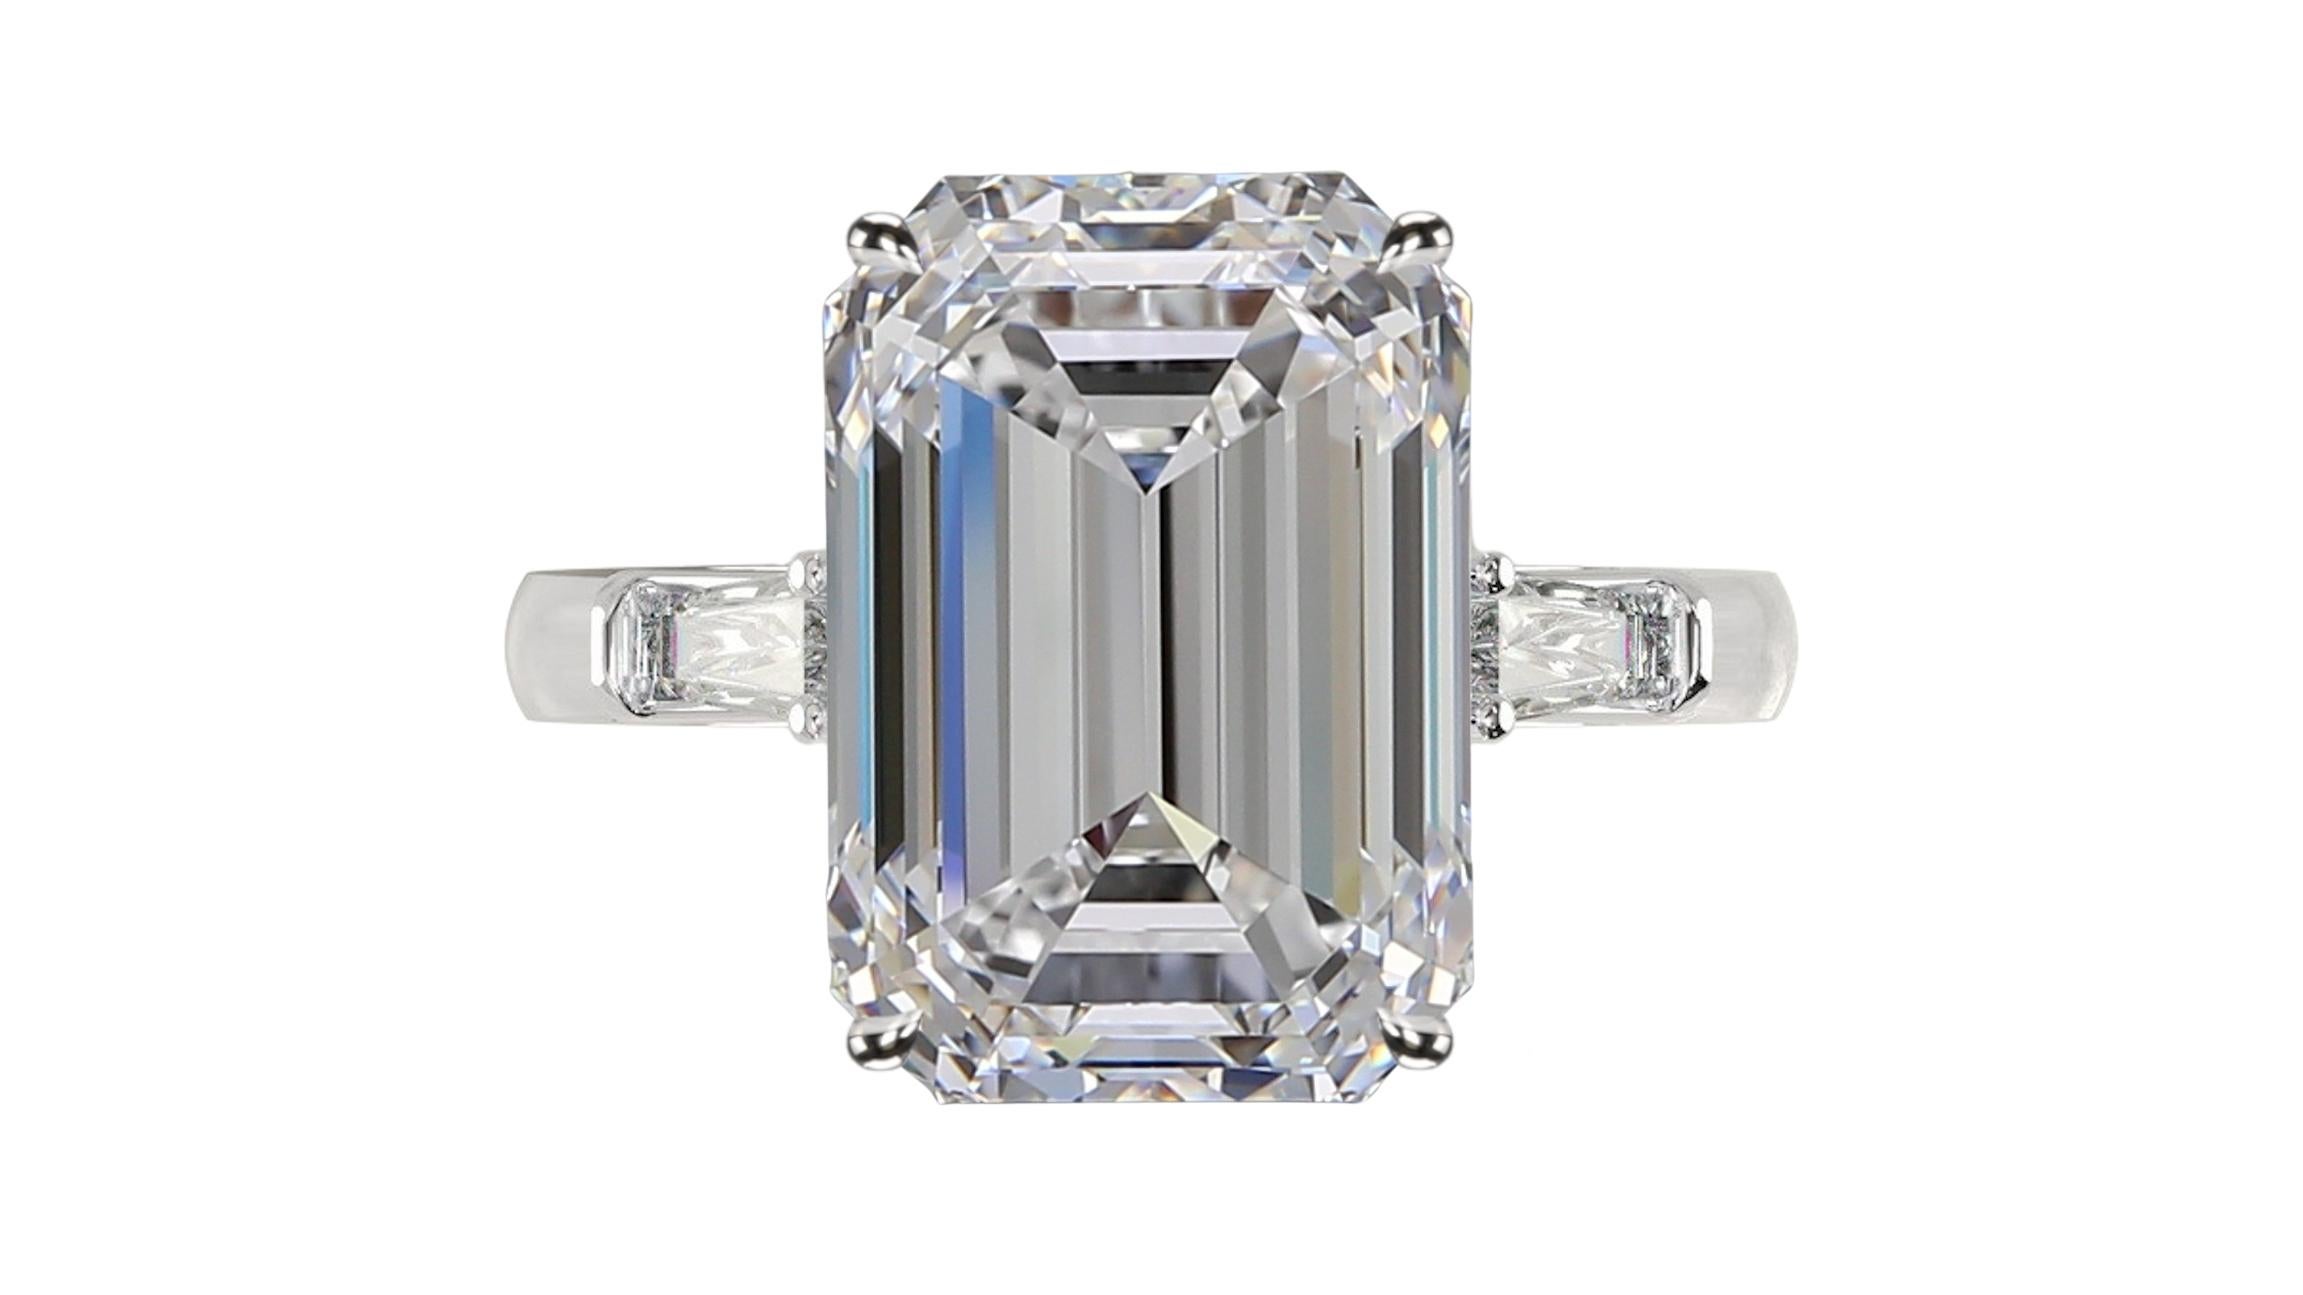 Amazing emerald cut diamond ring the main stone is an exquisite 6 carat emerald cut diamond with G color and VVS1 clarity plus excellent polish and symmetry.

the side diamonds are tapered baguette and very pure 

mounted in solid platinum